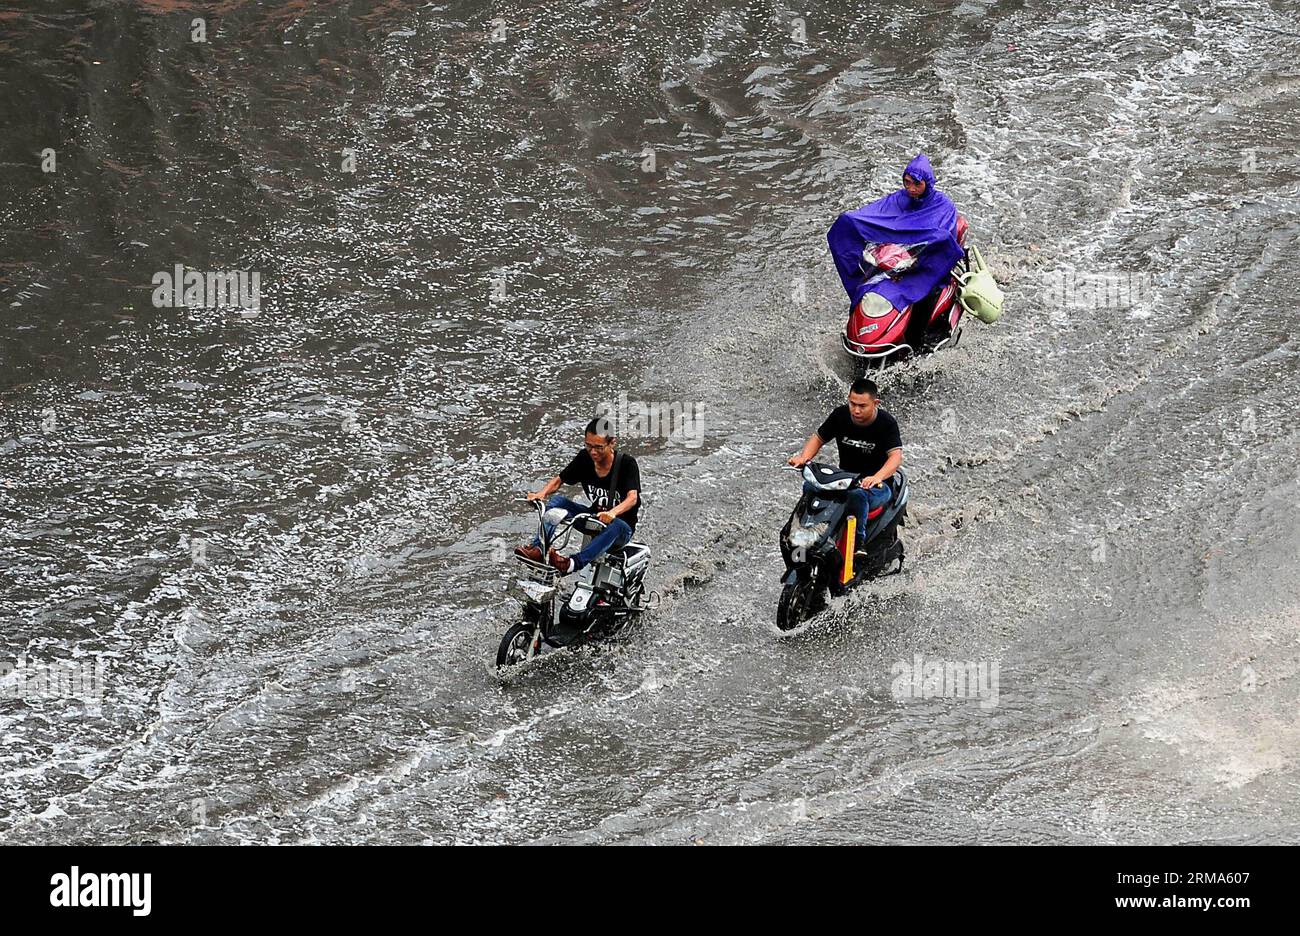 (140619) -- ZHENGZHOU, June 19, 2014 (Xinhua) -- People ride electric vehicles on a flooded road in Zhengzhou, capital of central China s Henan Province, June 19, 2014. The local meteorological authority issued a yellow warning on thunder and heavy rainstorms Thursday. (Xinhua/Wang Song) (mp) CHINA-HENAN-ZHENGZHOU-RAINSTORMS (CN) PUBLICATIONxNOTxINxCHN   Zhengzhou June 19 2014 XINHUA Celebrities Ride Electric VEHICLES ON a flooded Road in Zhengzhou Capital of Central China S Henan Province June 19 2014 The Local Meteorological Authority issued a Yellow Warning ON Thunder and Heavy Rainstorm Th Stock Photo